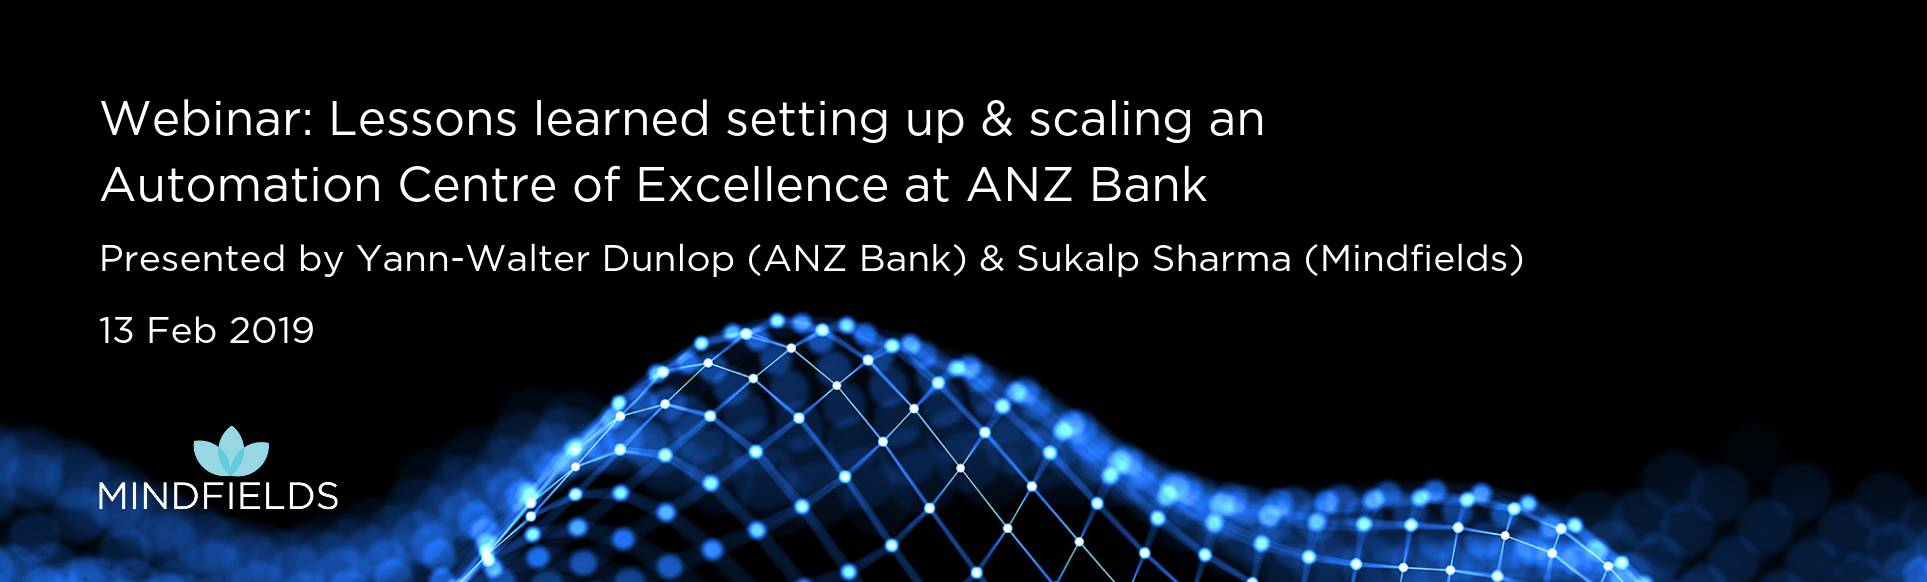 Automation Centre of Excellence at ANZ Bank